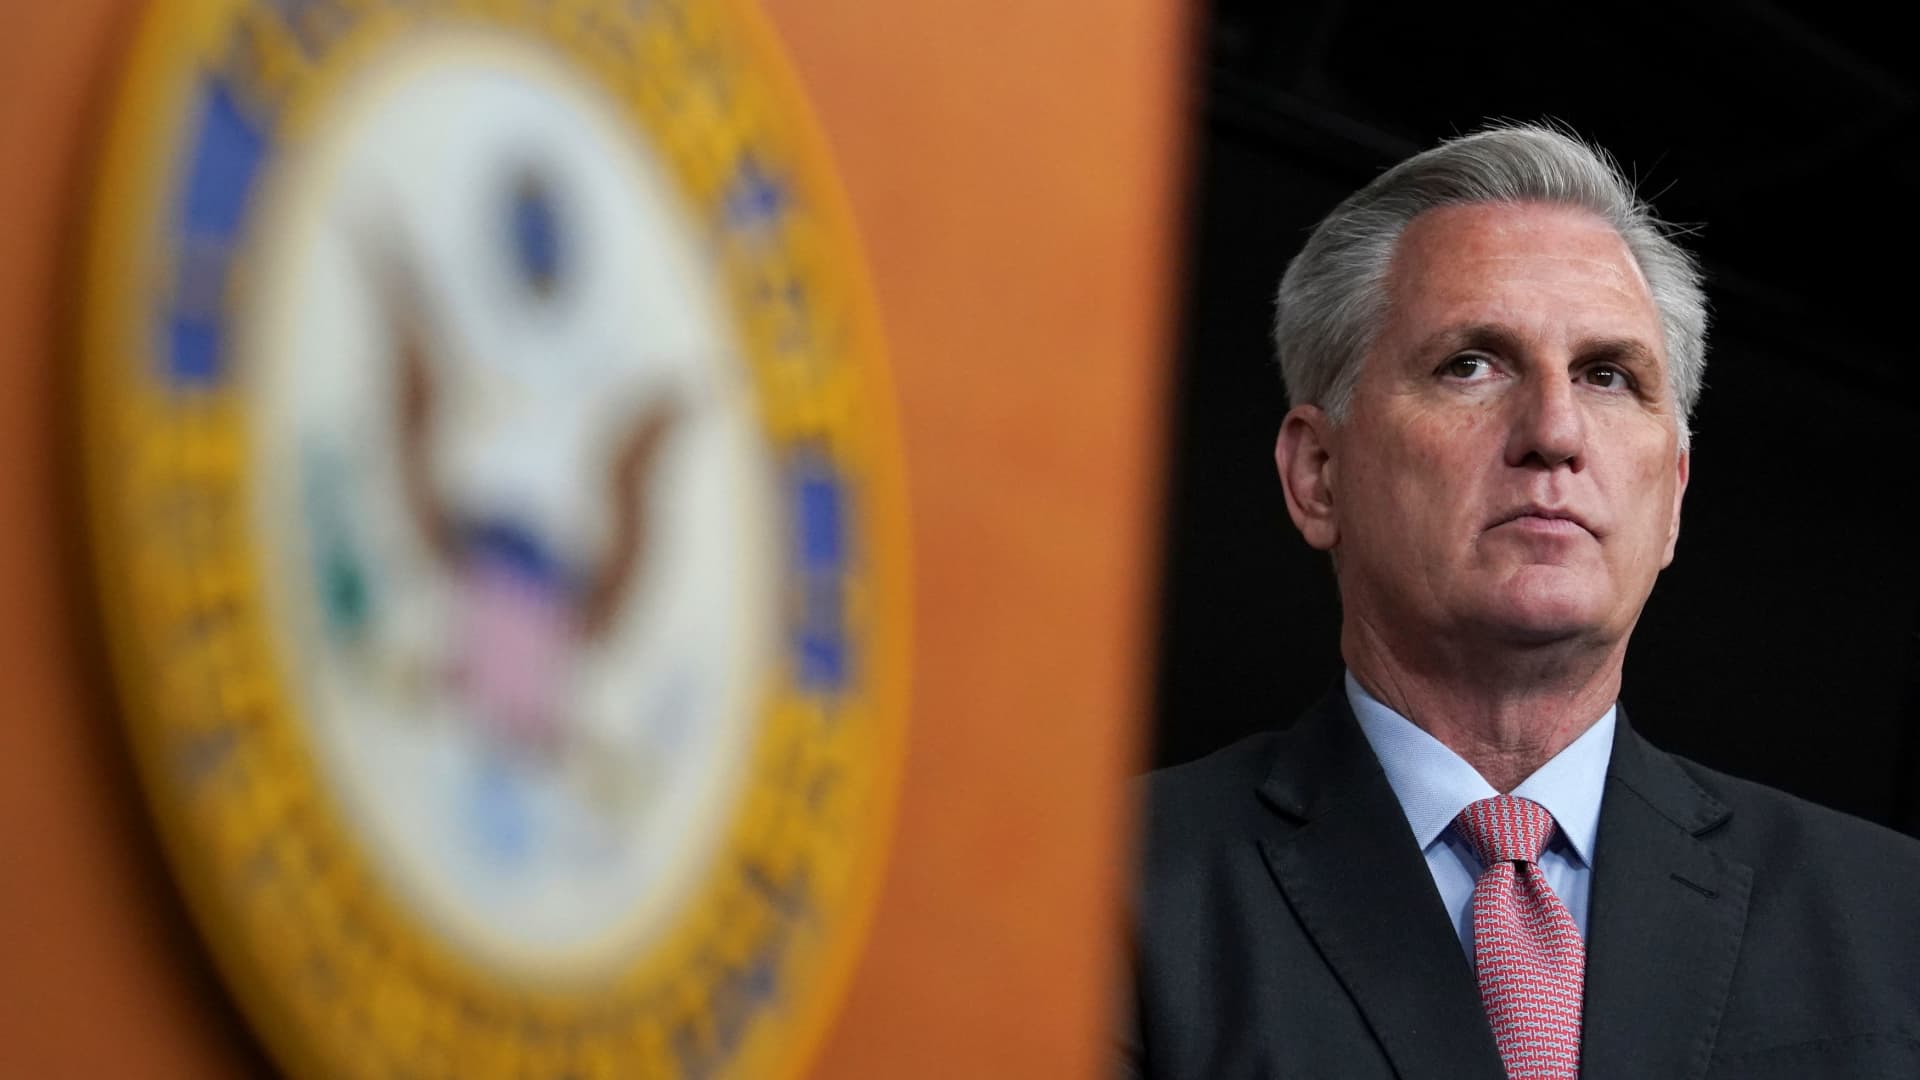 Jan. 6 probe subpoenas Republican House leader Kevin McCarthy, other lawmakers a..